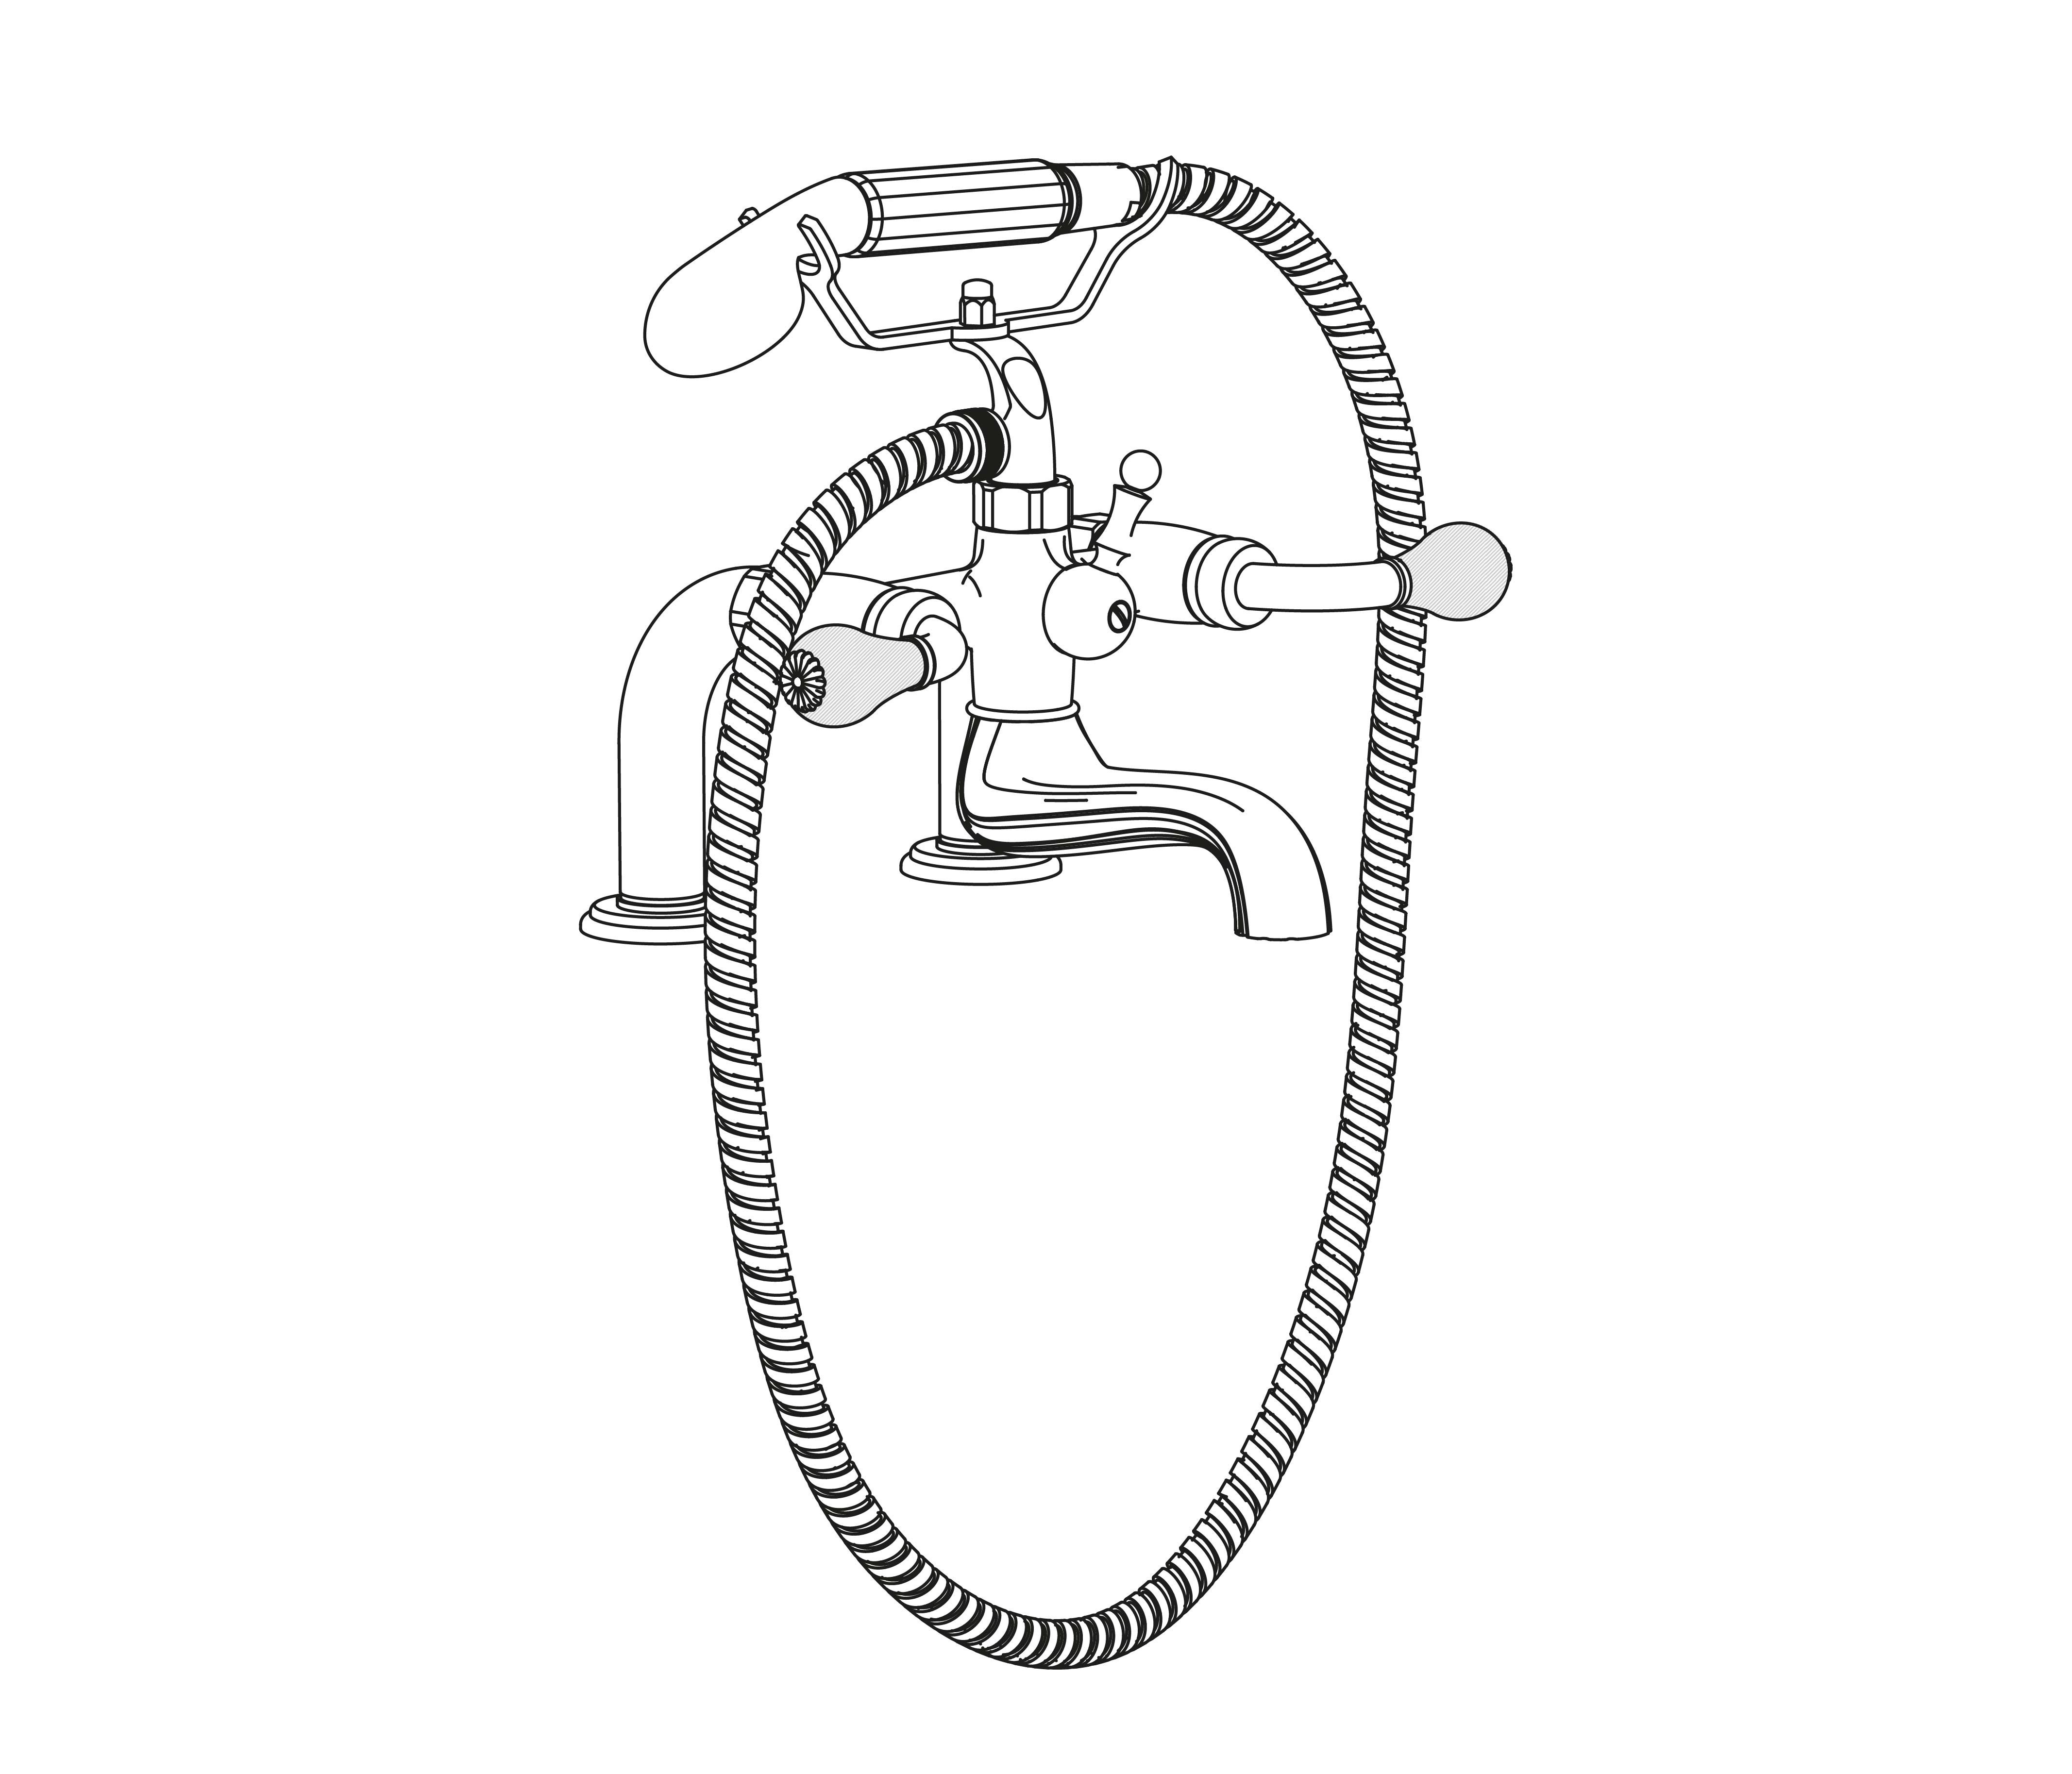 C59-3306 Rim mounted bath and shower mixer